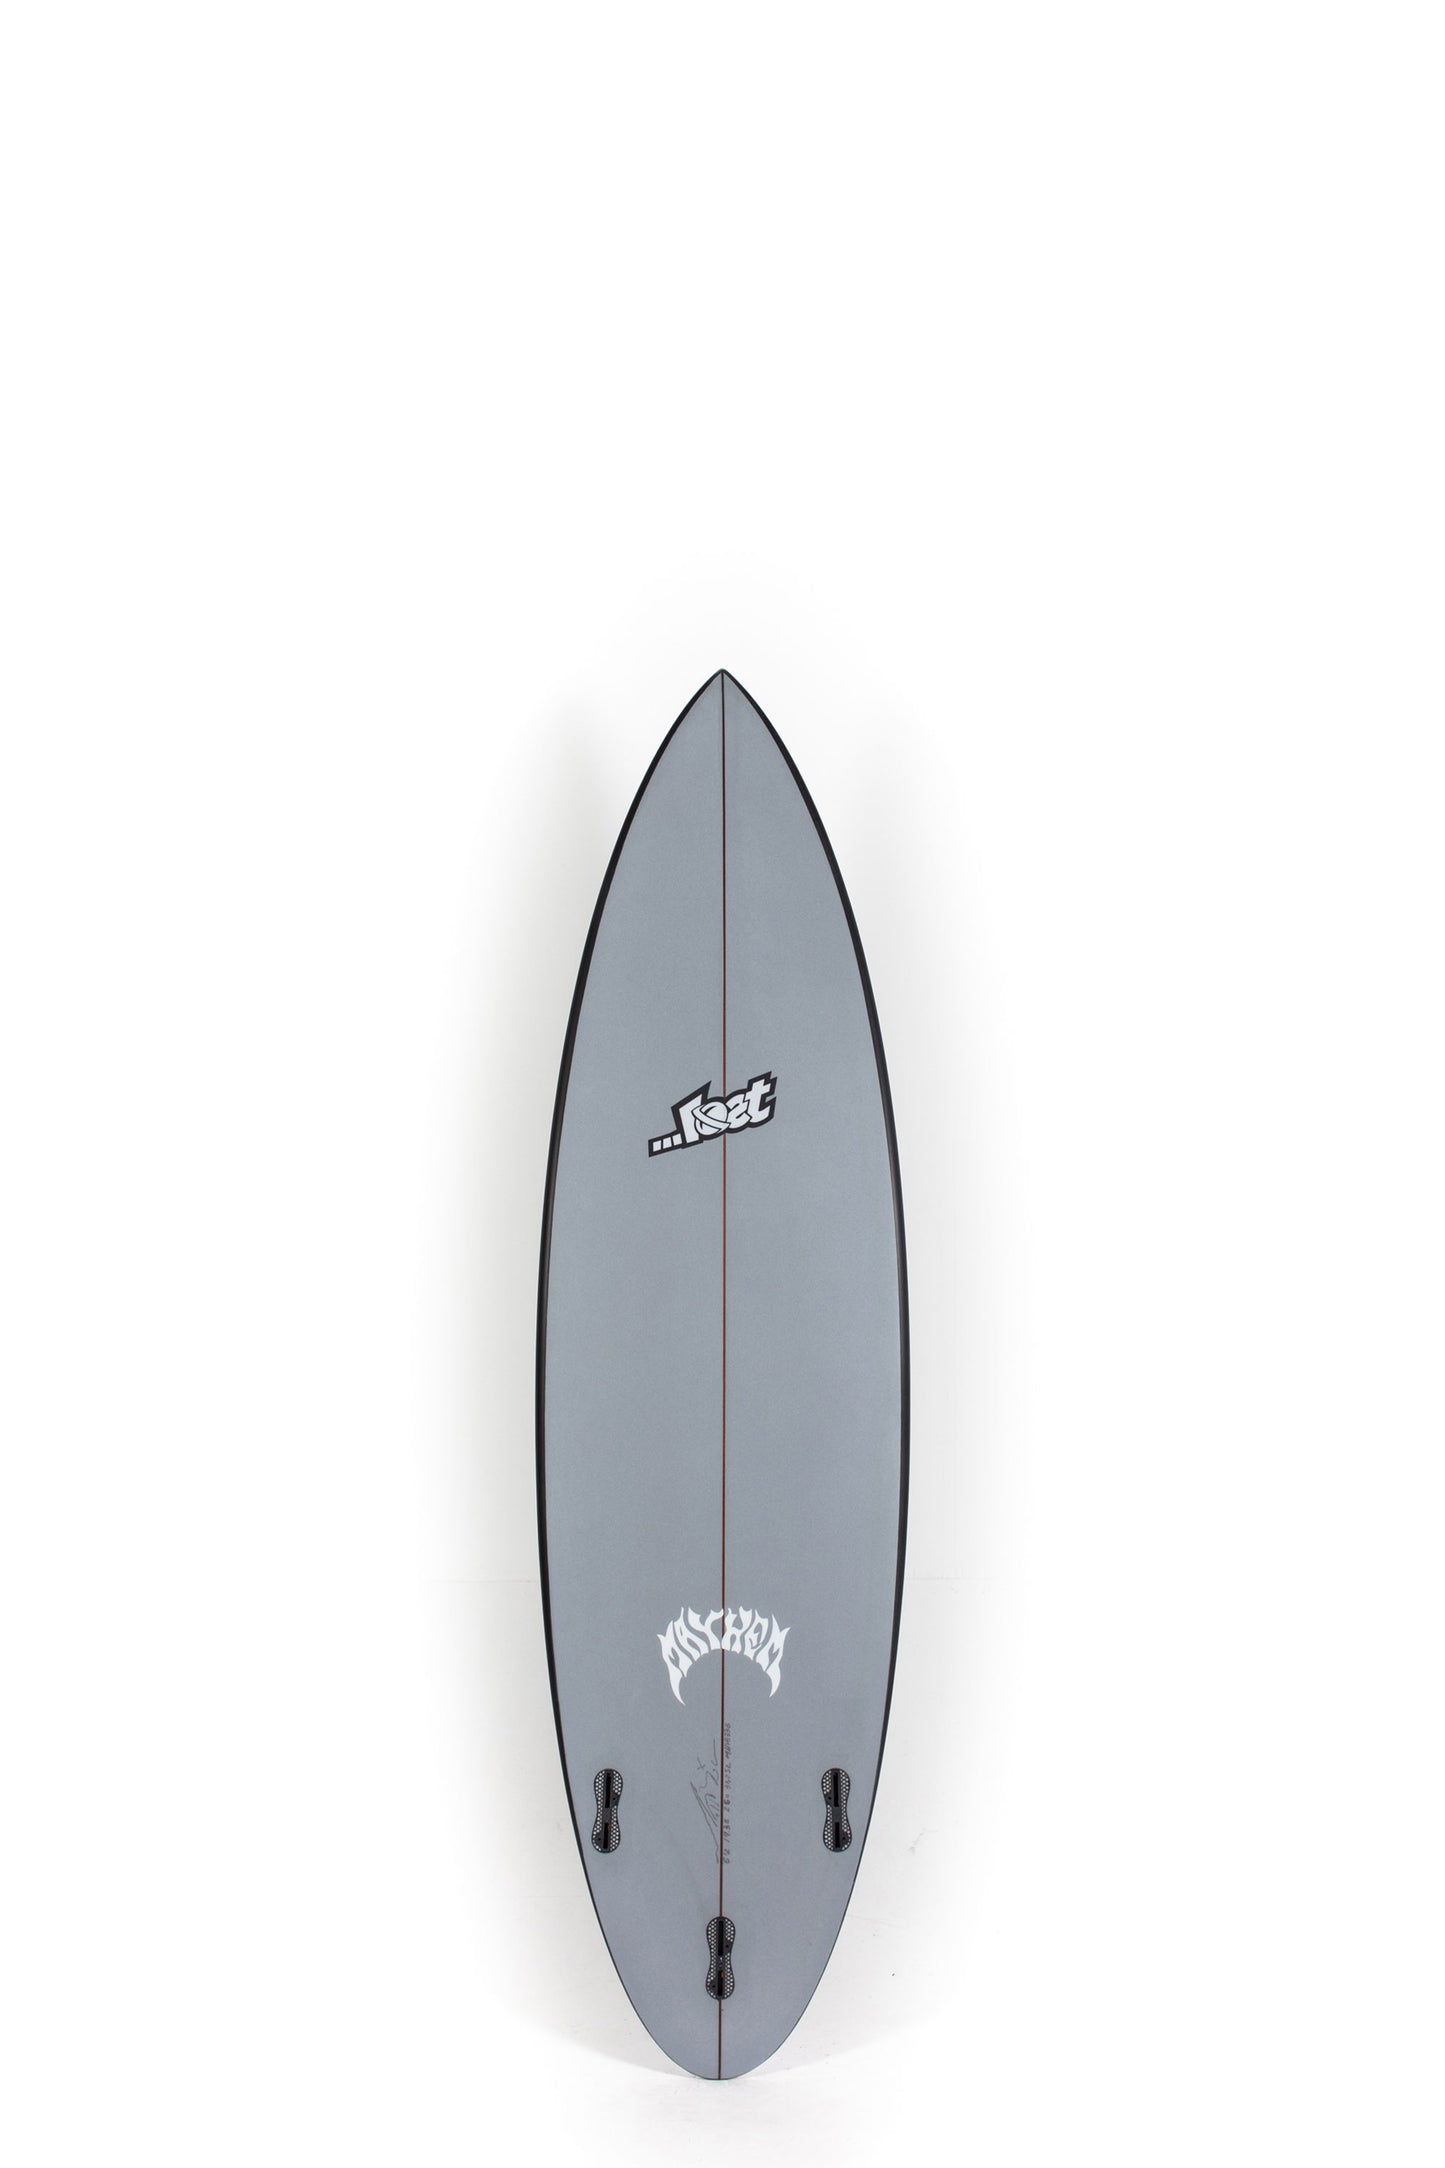 ALL TYPES OF SURFBOARDS  Available at PUKAS SURF SHOP – Page 2